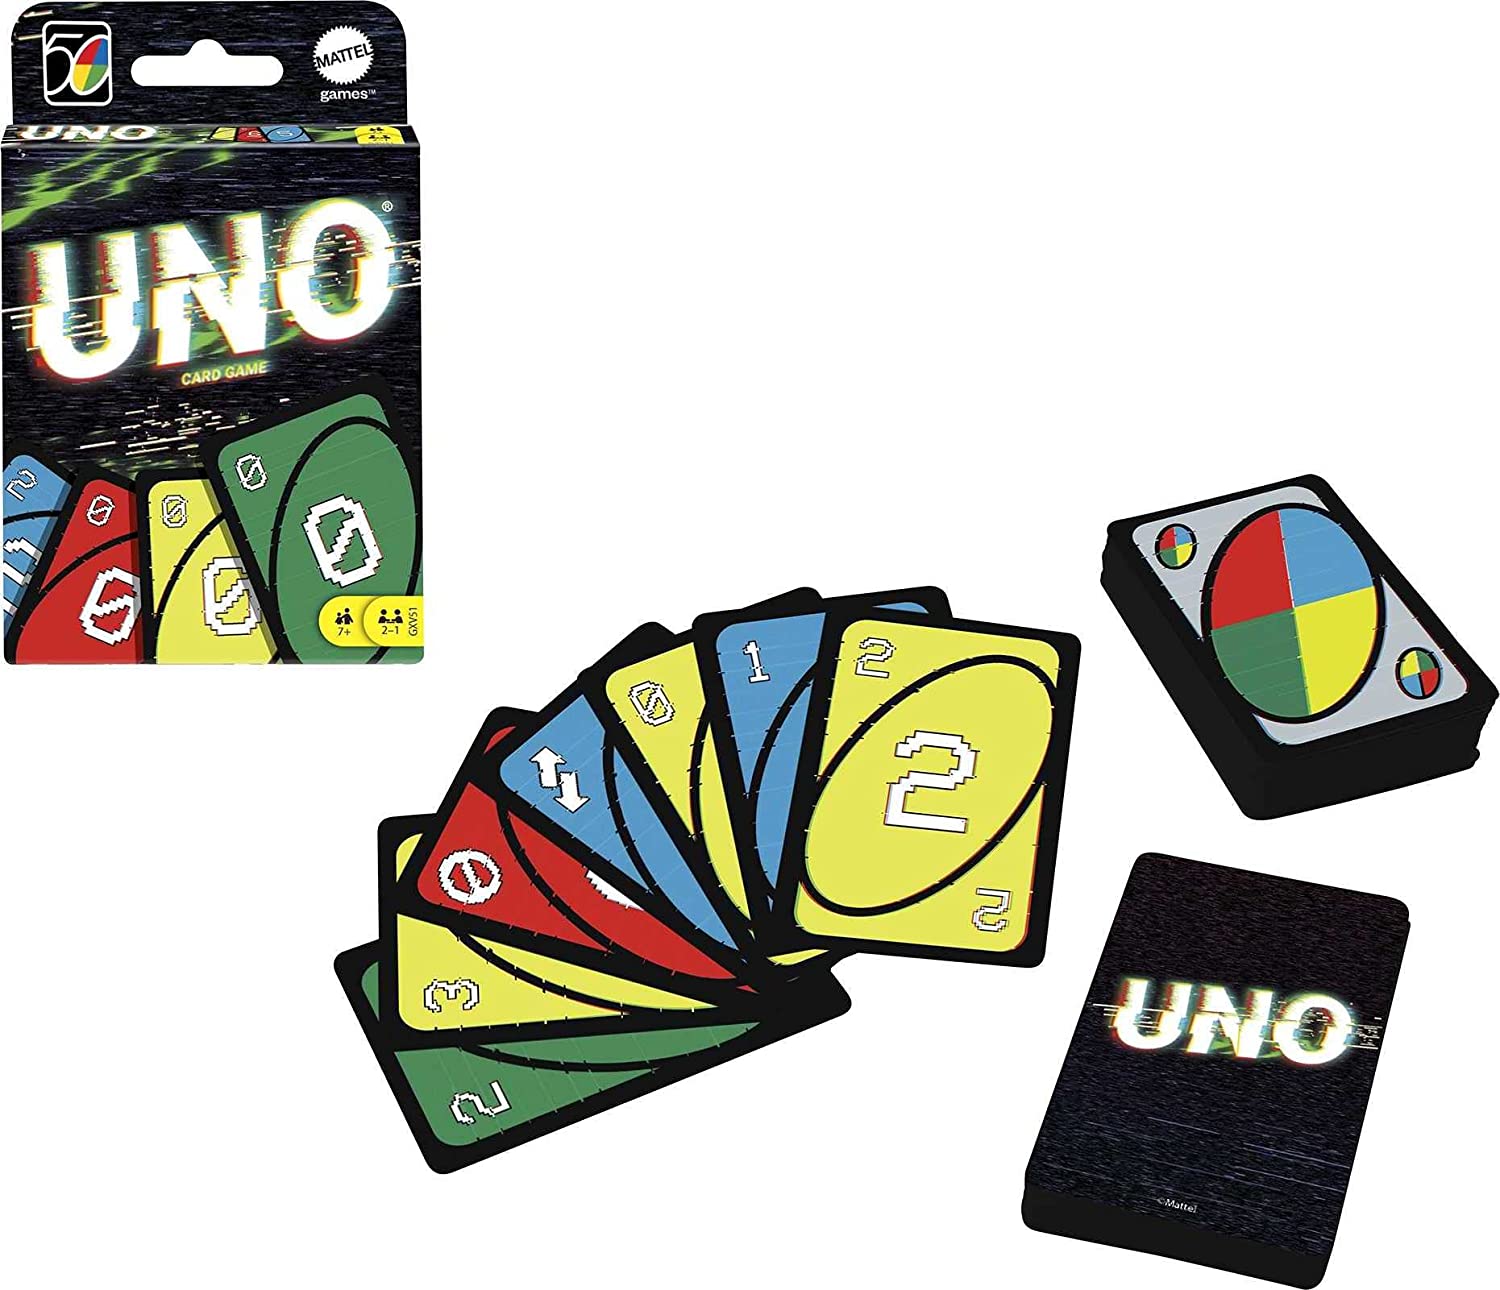 Mattel Games UNO Iconic 2000s Card game - Paixnidia 1001